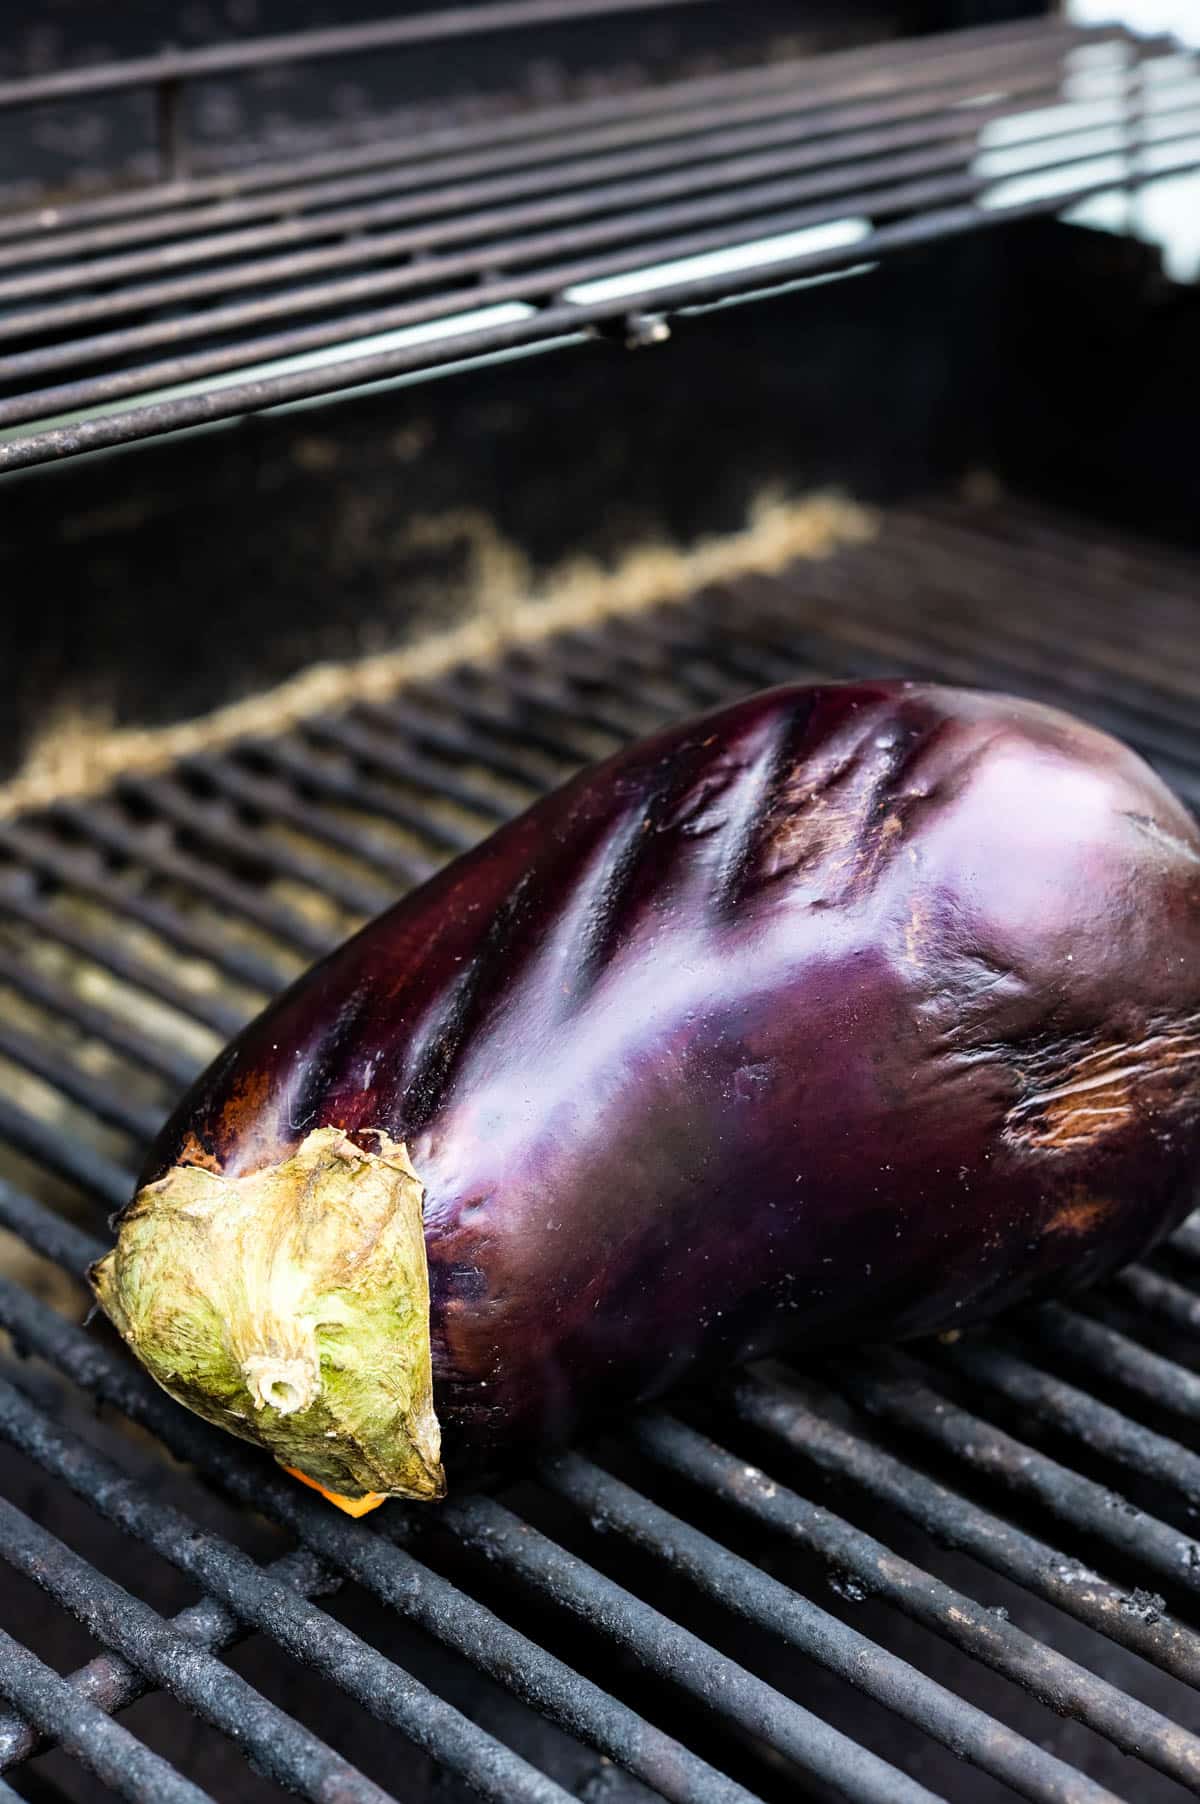 A whole eggplant on a grill.